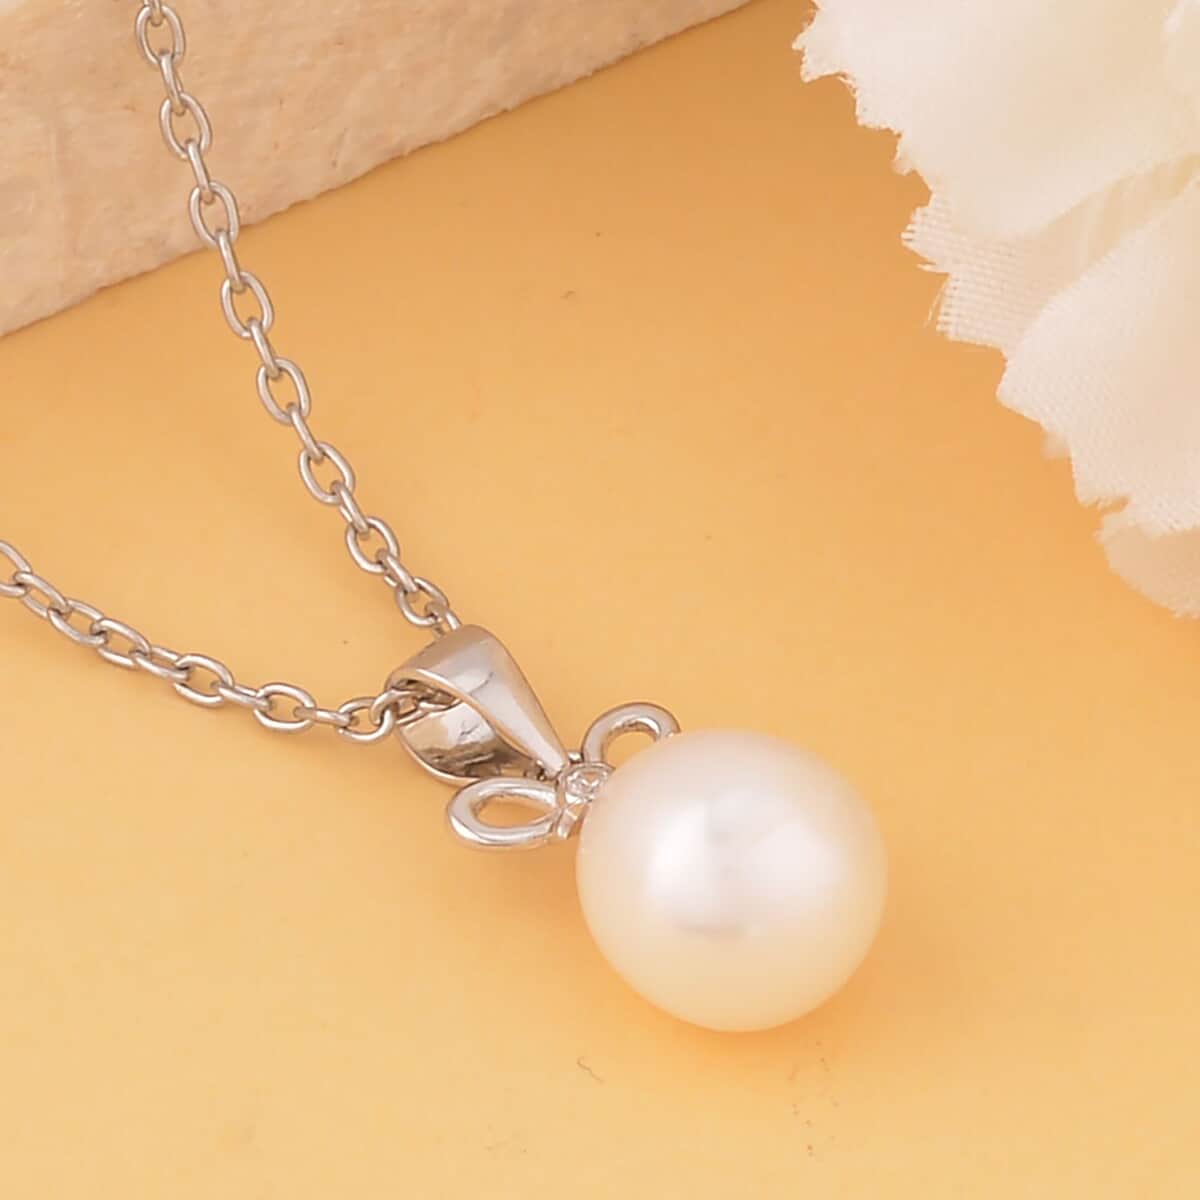 Buy Freshwater Cultured Pearl and Simulated Diamond Pendant in Rhodium ...